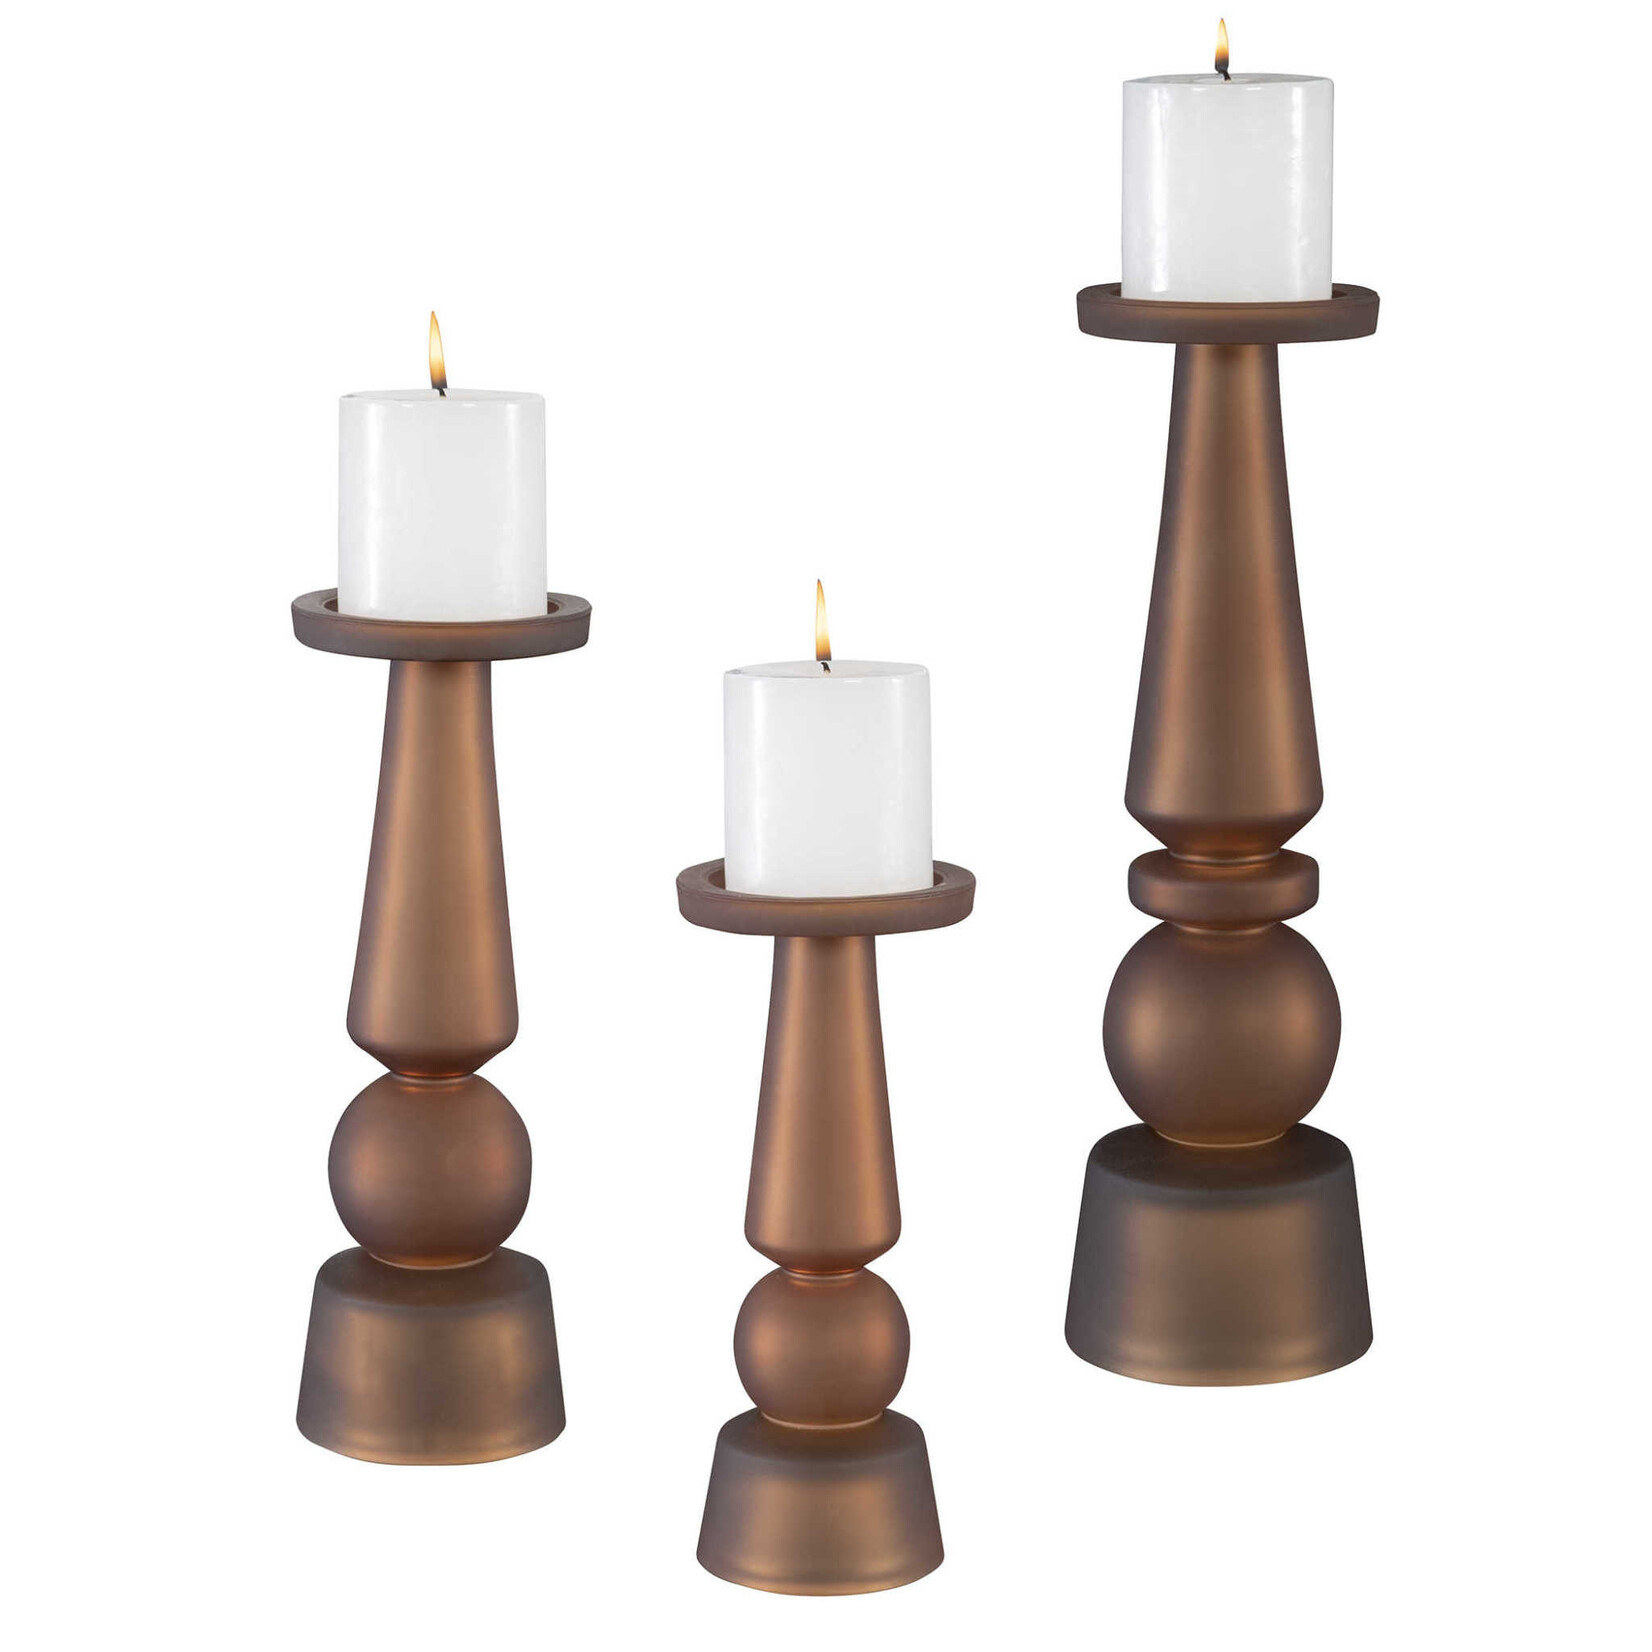 UTTERMOST CASSIOPEIA CANDLEHOLDERS SET/3